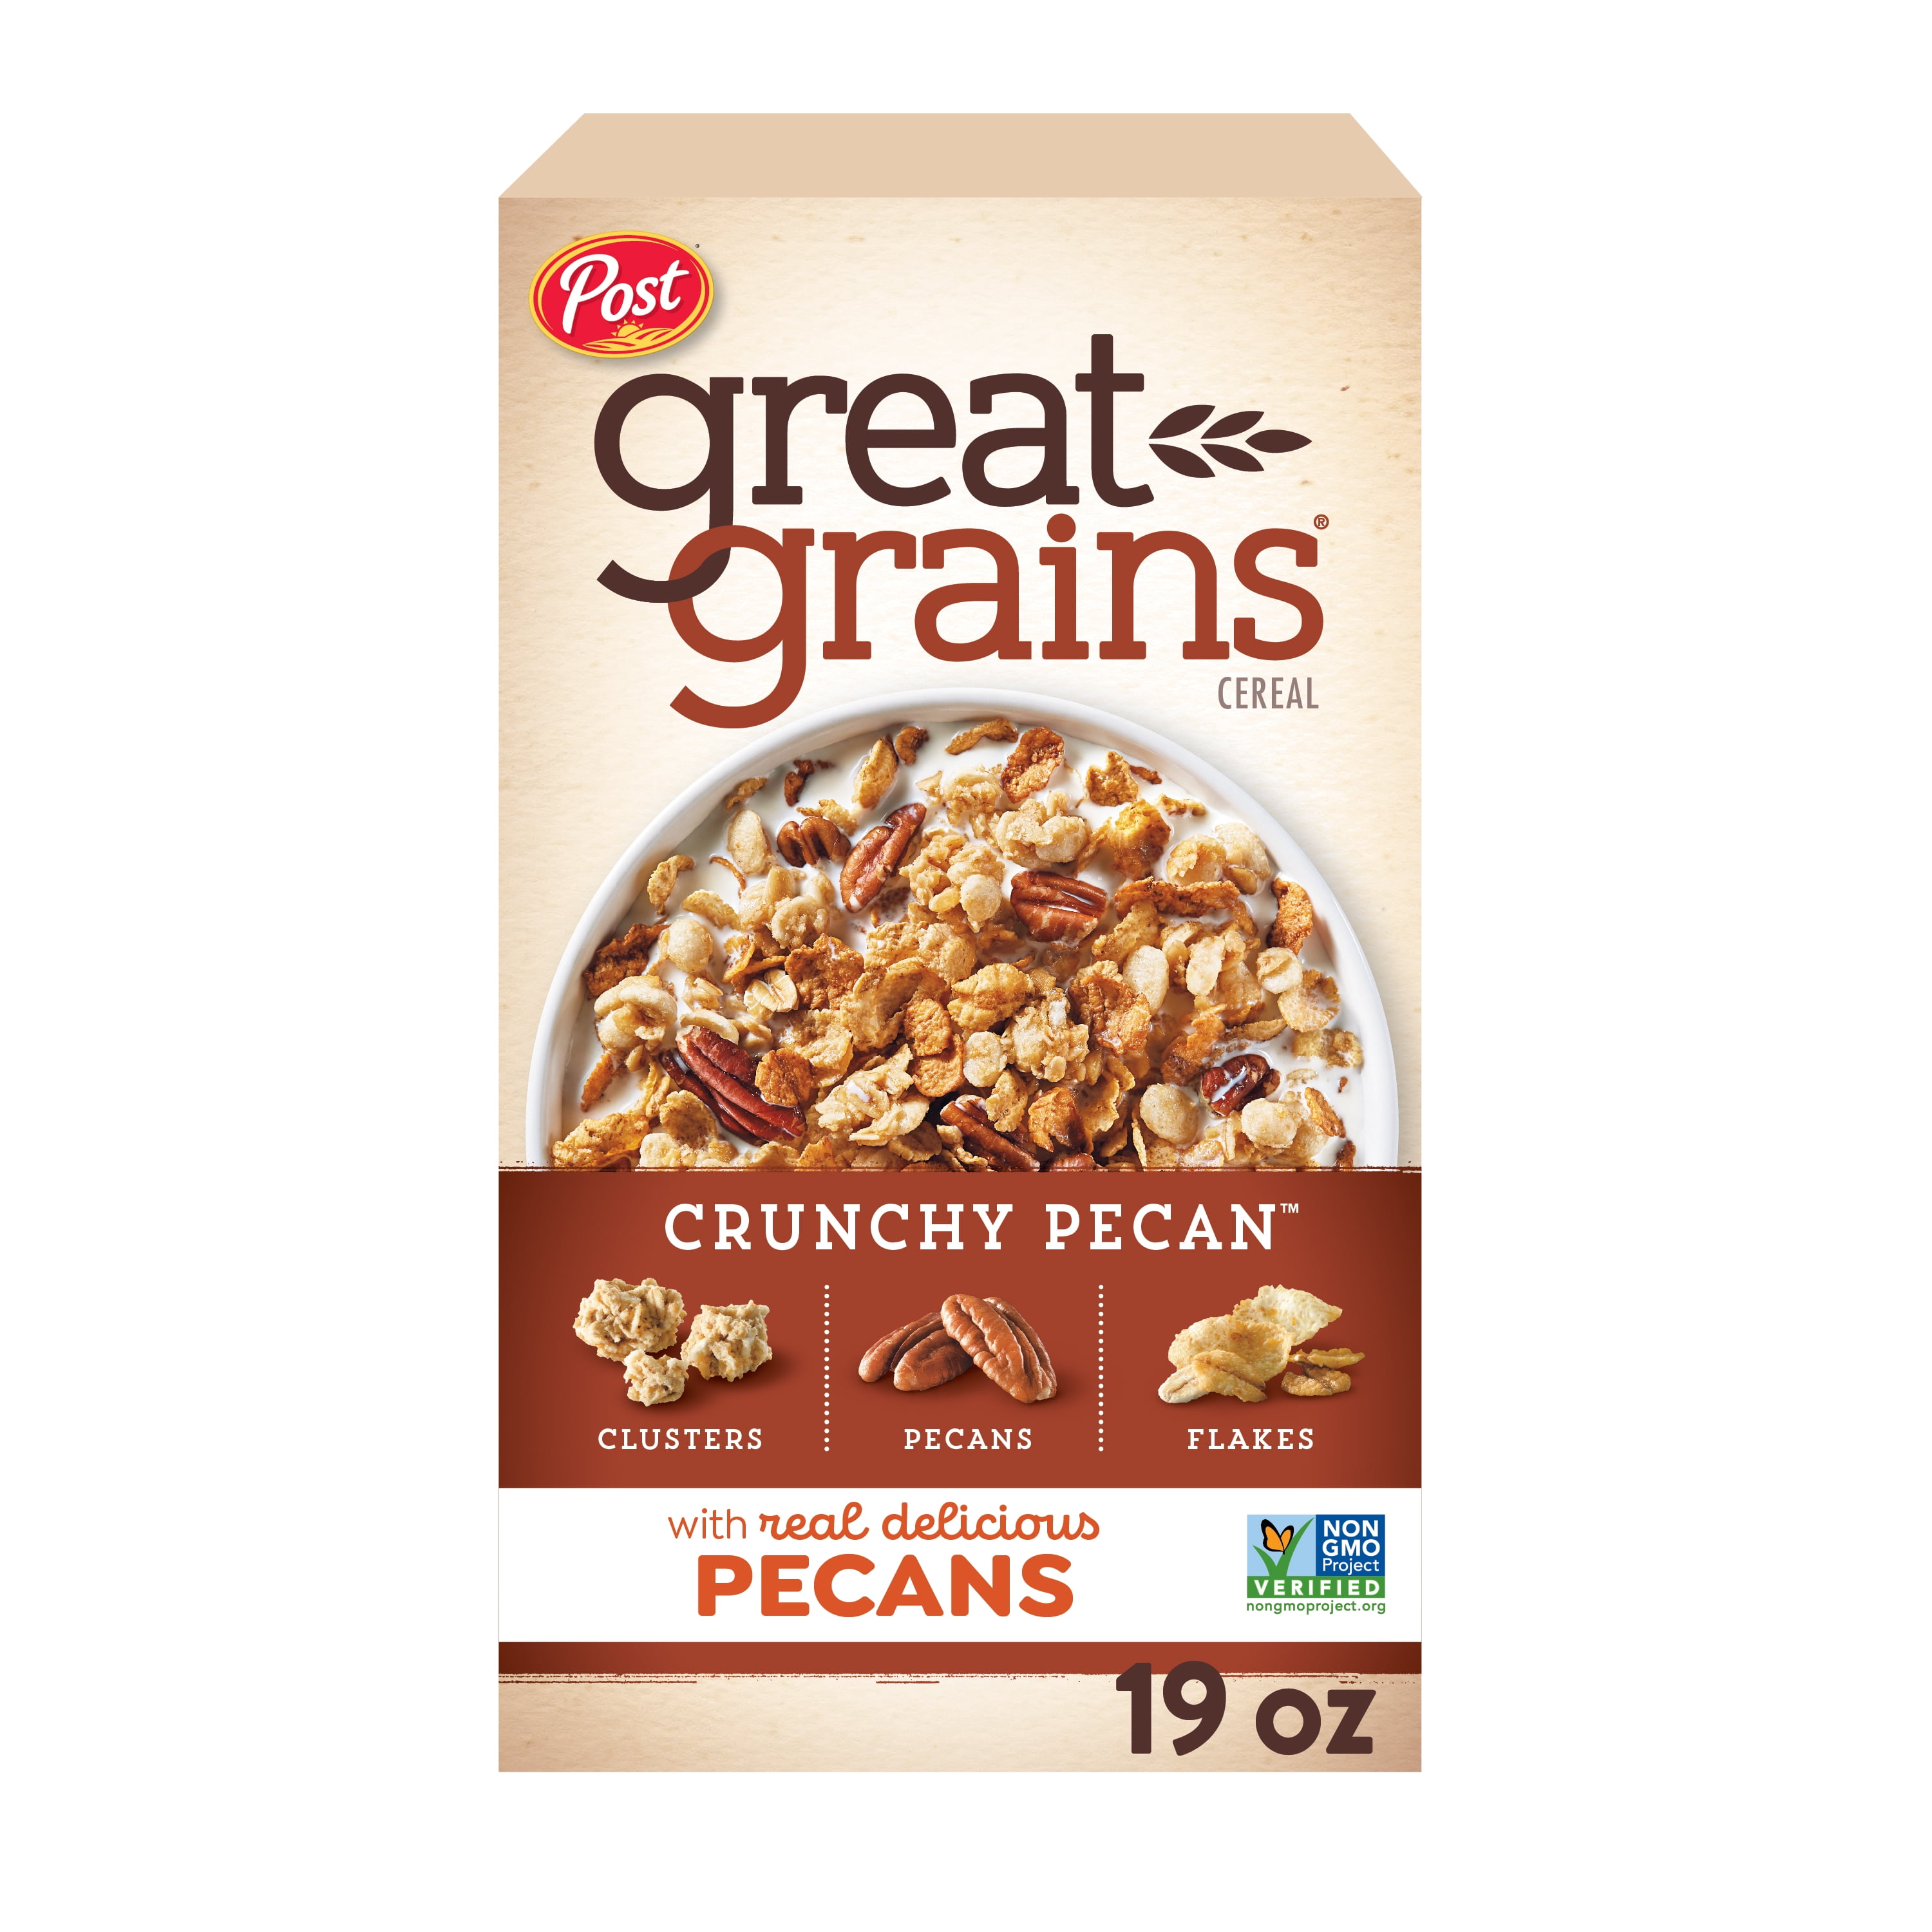 Post Great Grains Crunchy Pecan Breakfast Cereal, Non GMO Project Verified, Heart Healthy, Low Saturated Fat,  Whole Grain Cereal, 19 Ounce